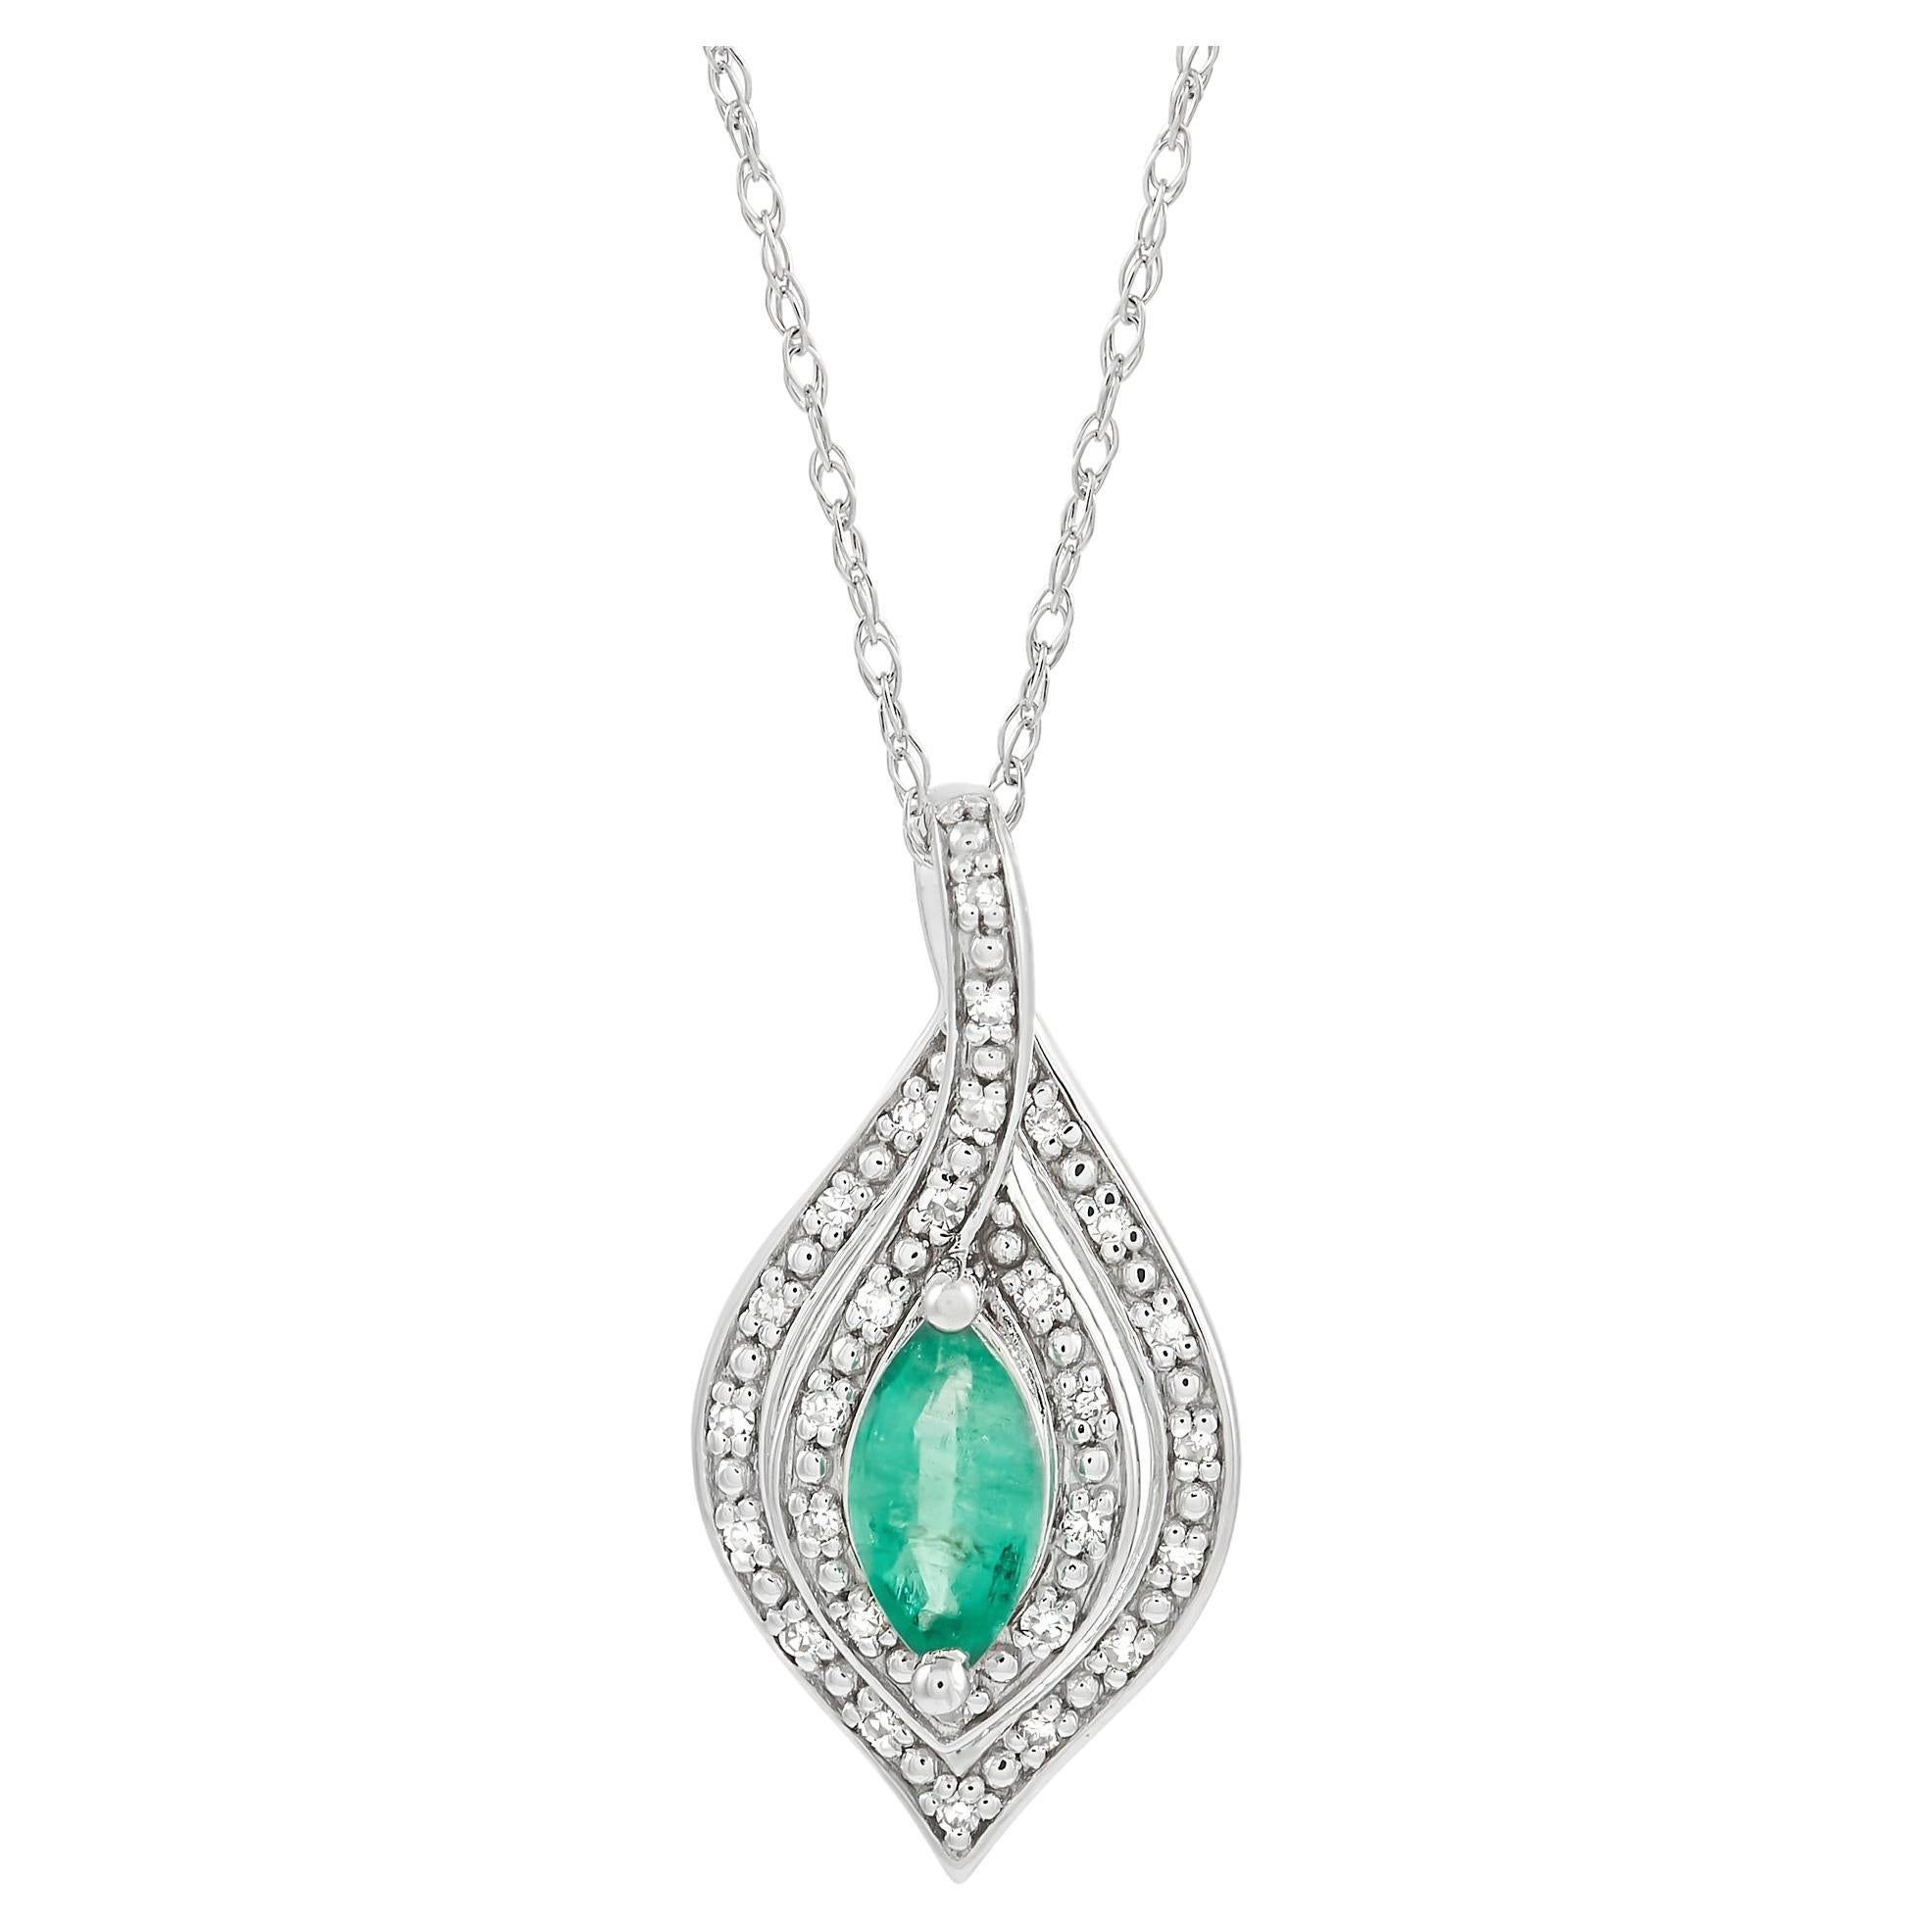 LB Exclusive 14K White Gold 0.08 Ct Diamond and Emerald Necklace For Sale